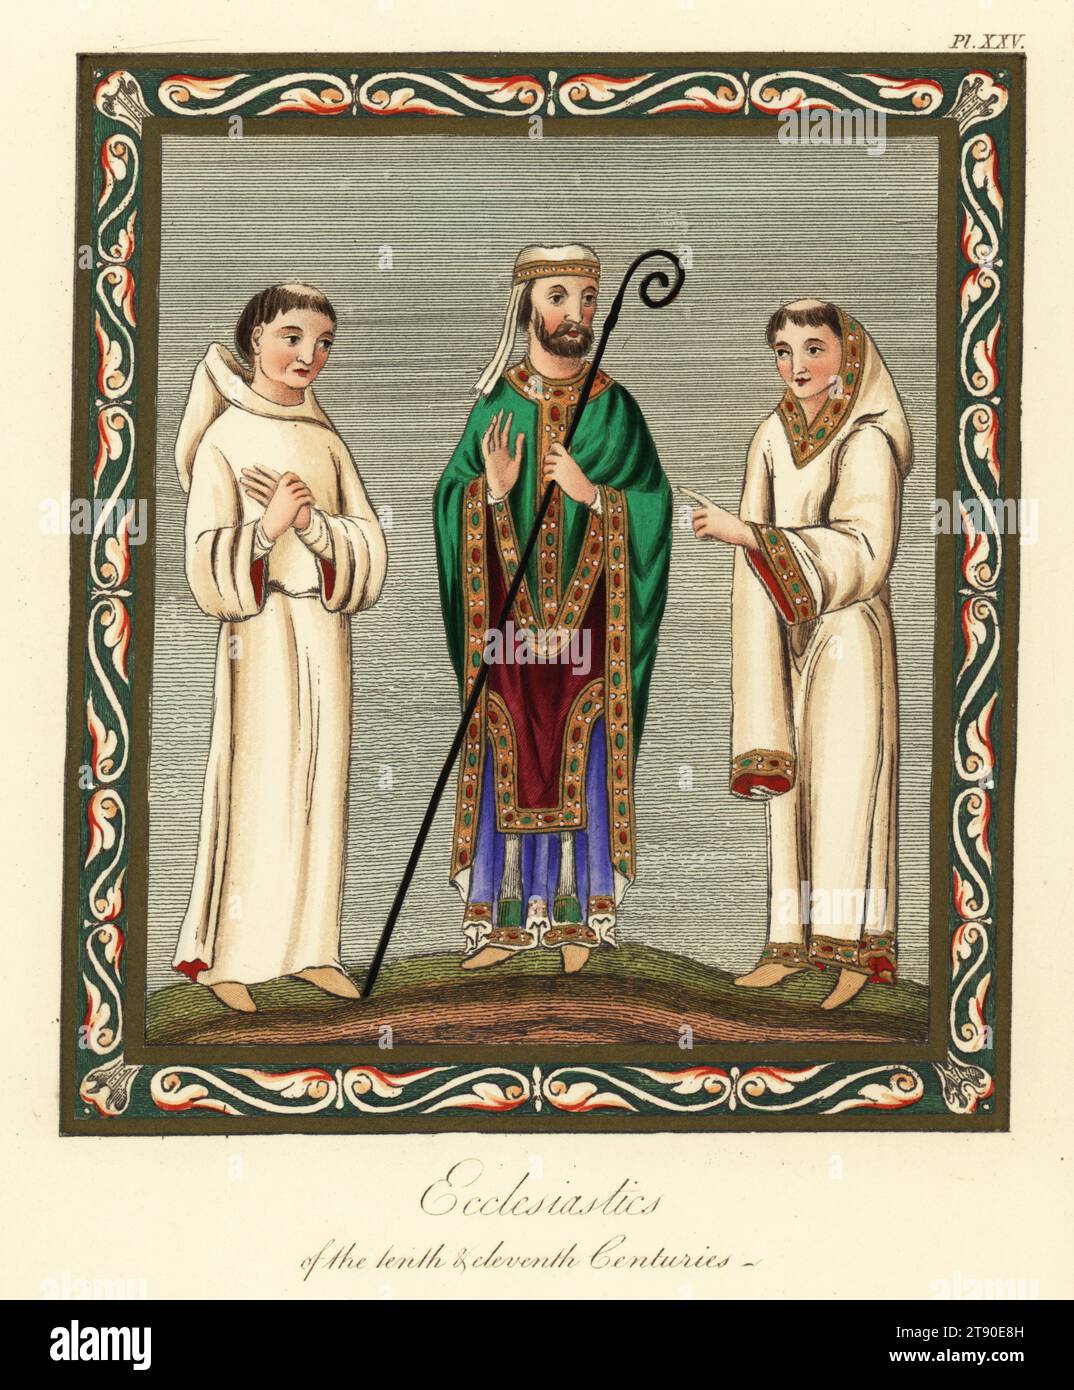 Ecclesiastics of the 10th and 11th centuries. Bishop with crozier, tonsured monks in hooded habits. Handcoloured engraving by Joseph Strutt from his Complete View of the Dress and Habits of the People of England, Henry Bohn, London, 1842. Stock Photo